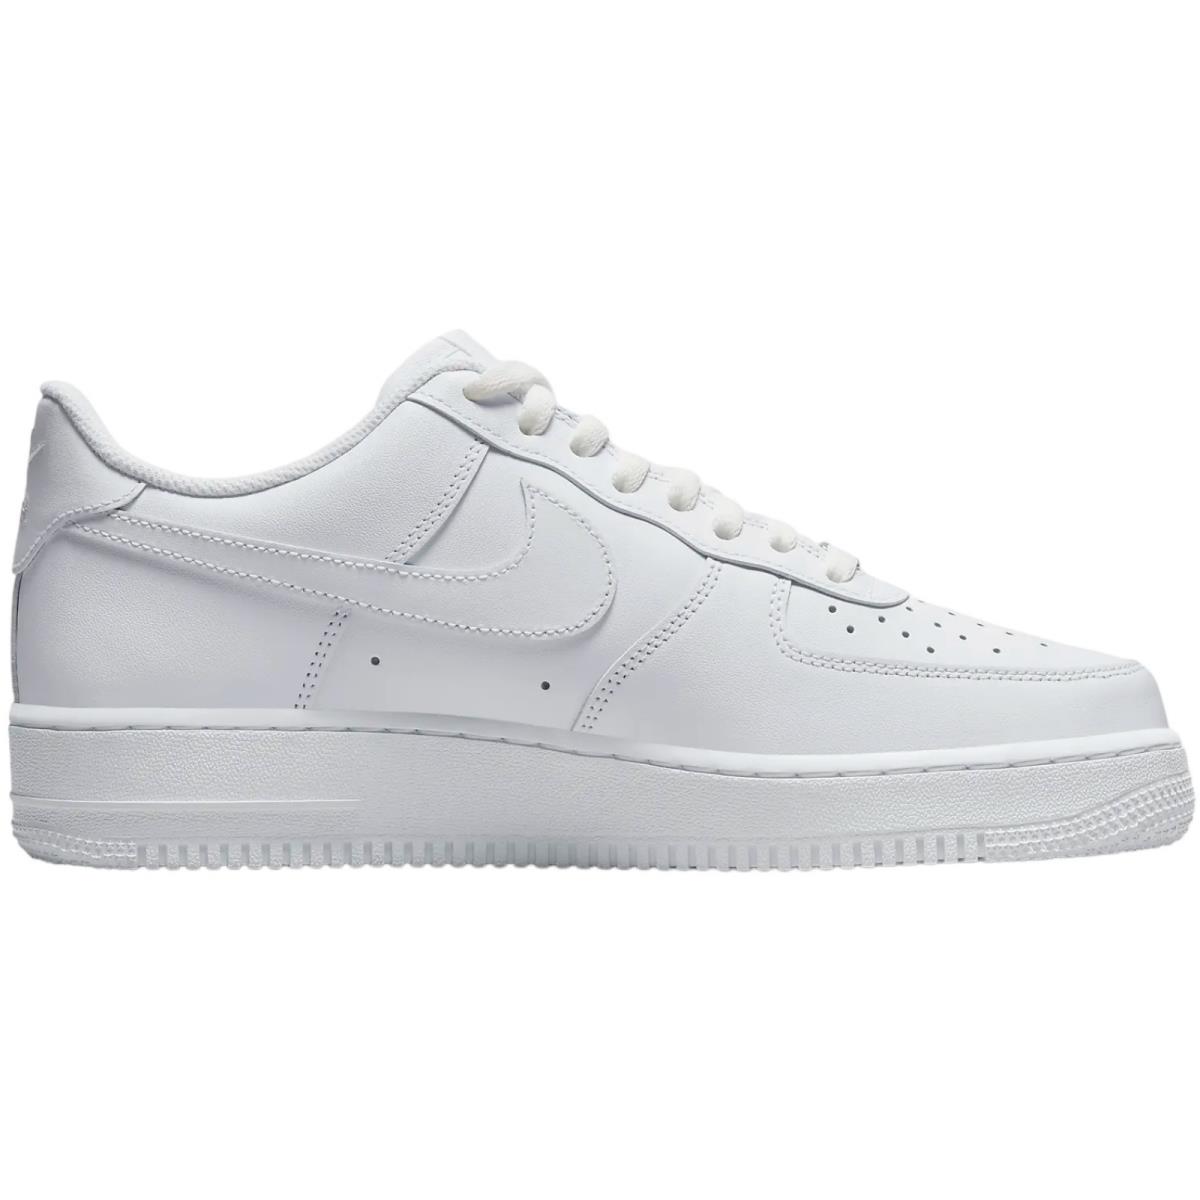 Nike Air Force 1 `07 Men`s Casual Shoes All Colors US Sizes 7-14 White/White